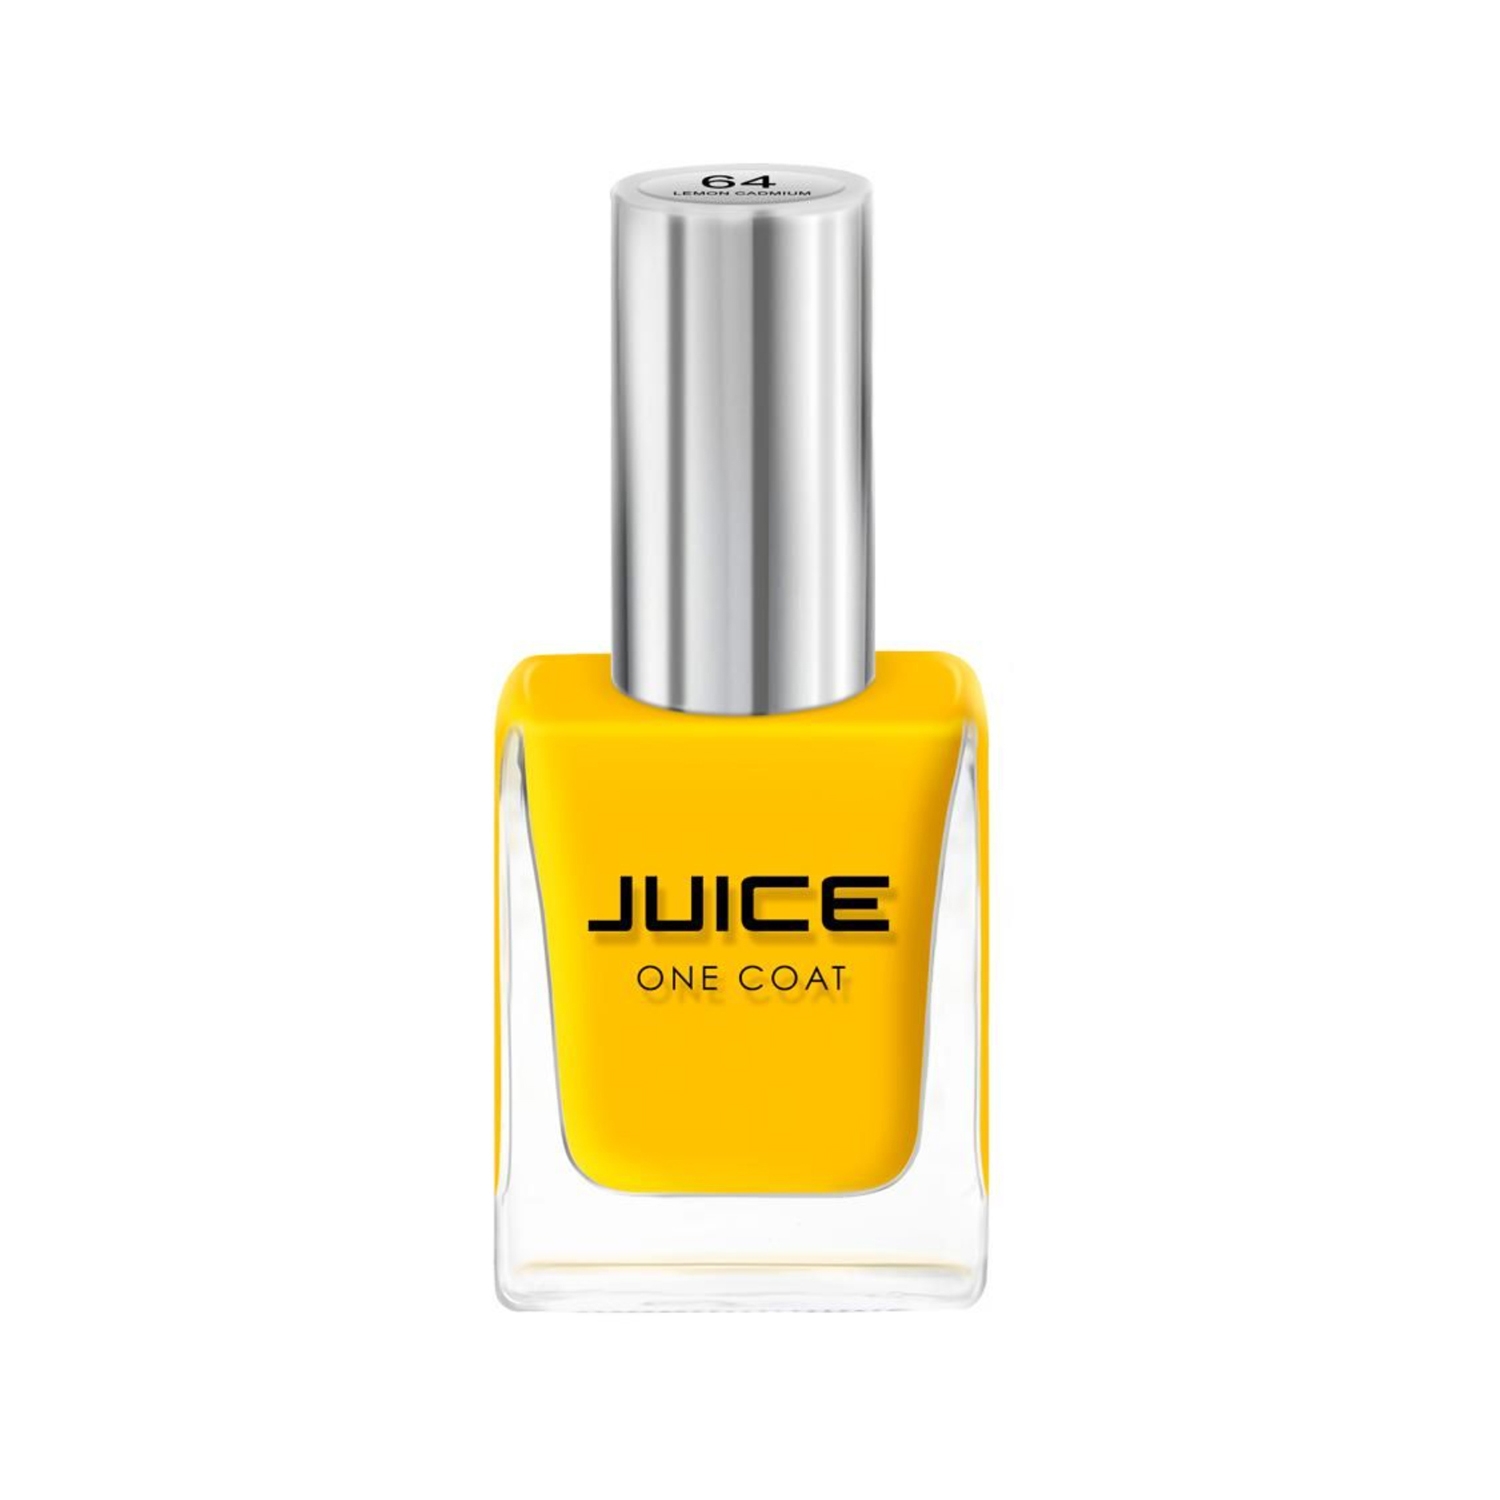 Juice One Coat Quick Dry Chip Resistant Nail Polish - 66 Wiggle Fingers  (11ml)